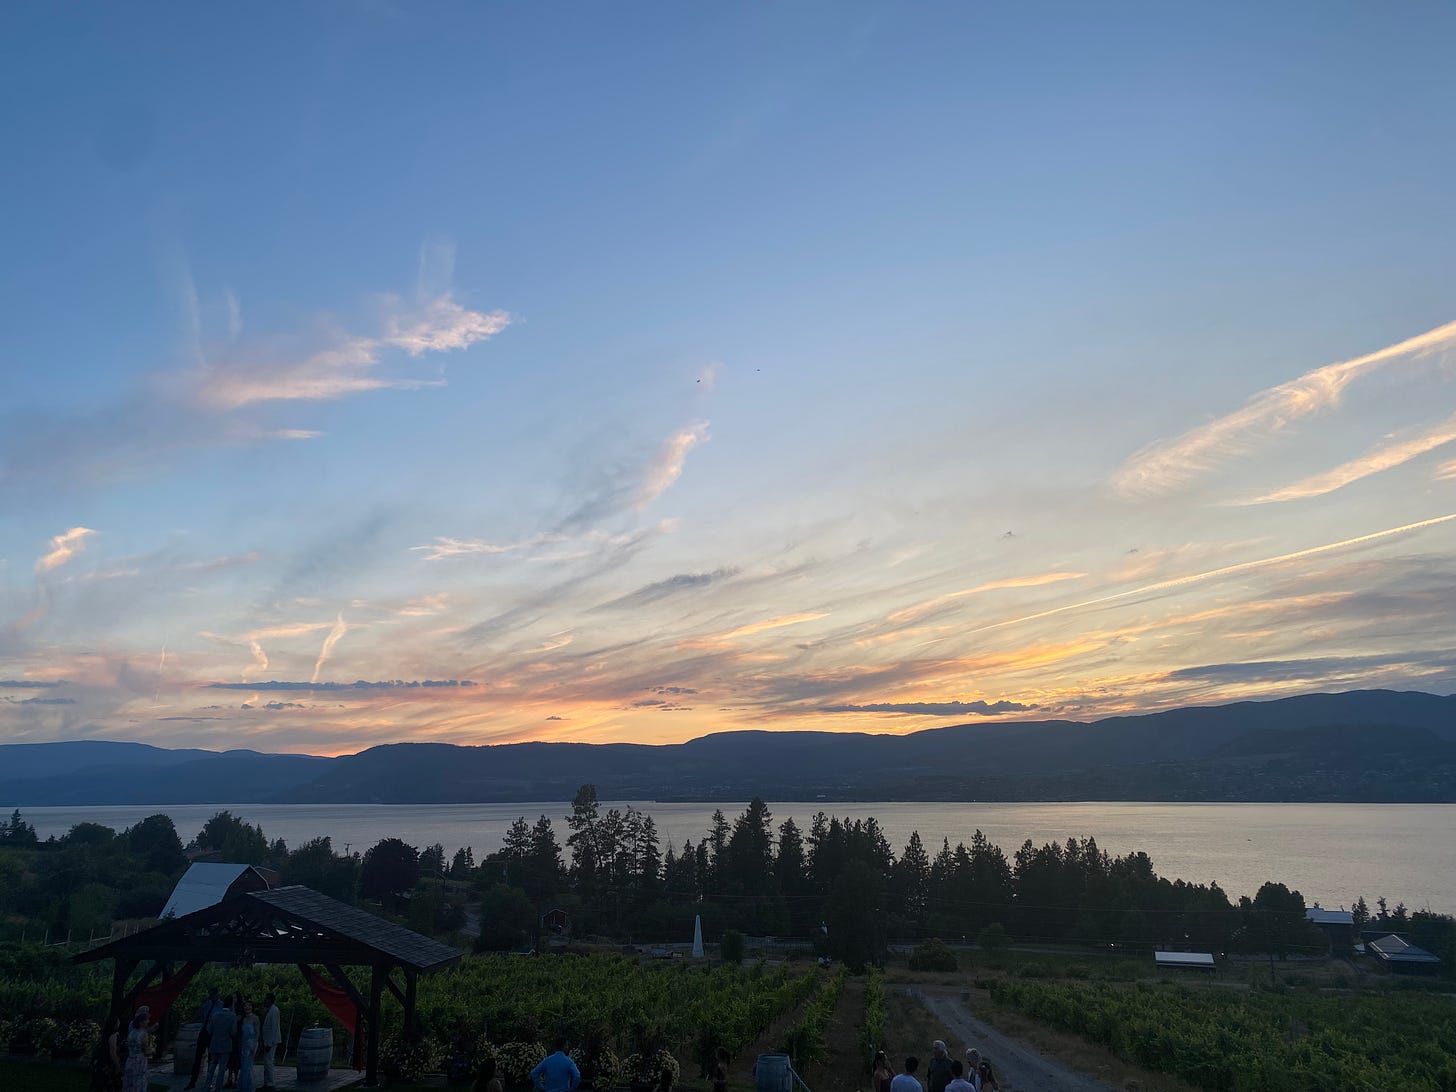 A sunset view of Okanagan Lake, from a winery in Kelowna. Low mountains are deep blue on the horizon, and above them wisps of cloud in the sky look orange, pink, and white. In the foreground, on the near side of the lake, is a vineyard with a dirt road on the right hand side. Trees line the lake behind the grapevines.